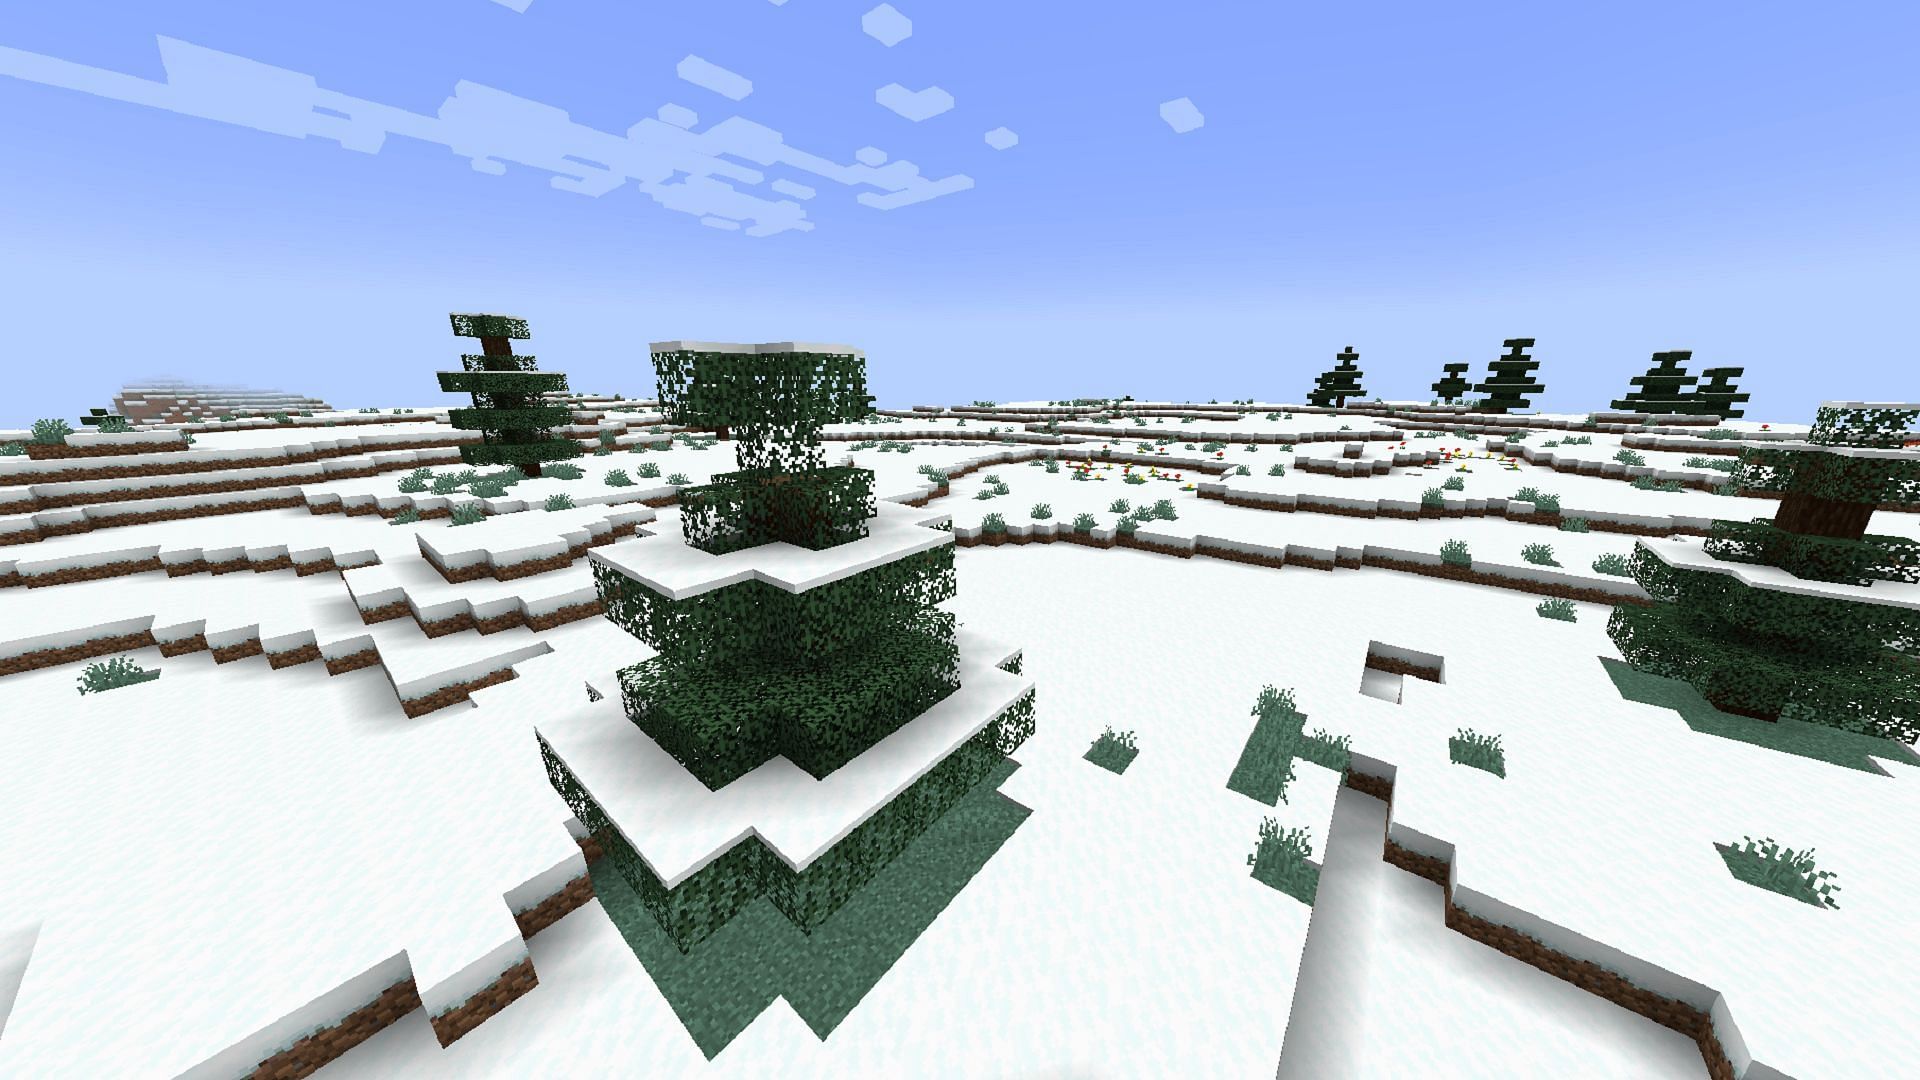 Certain seed landscapes are perfect for Minecraft builders (Image via Mojang)